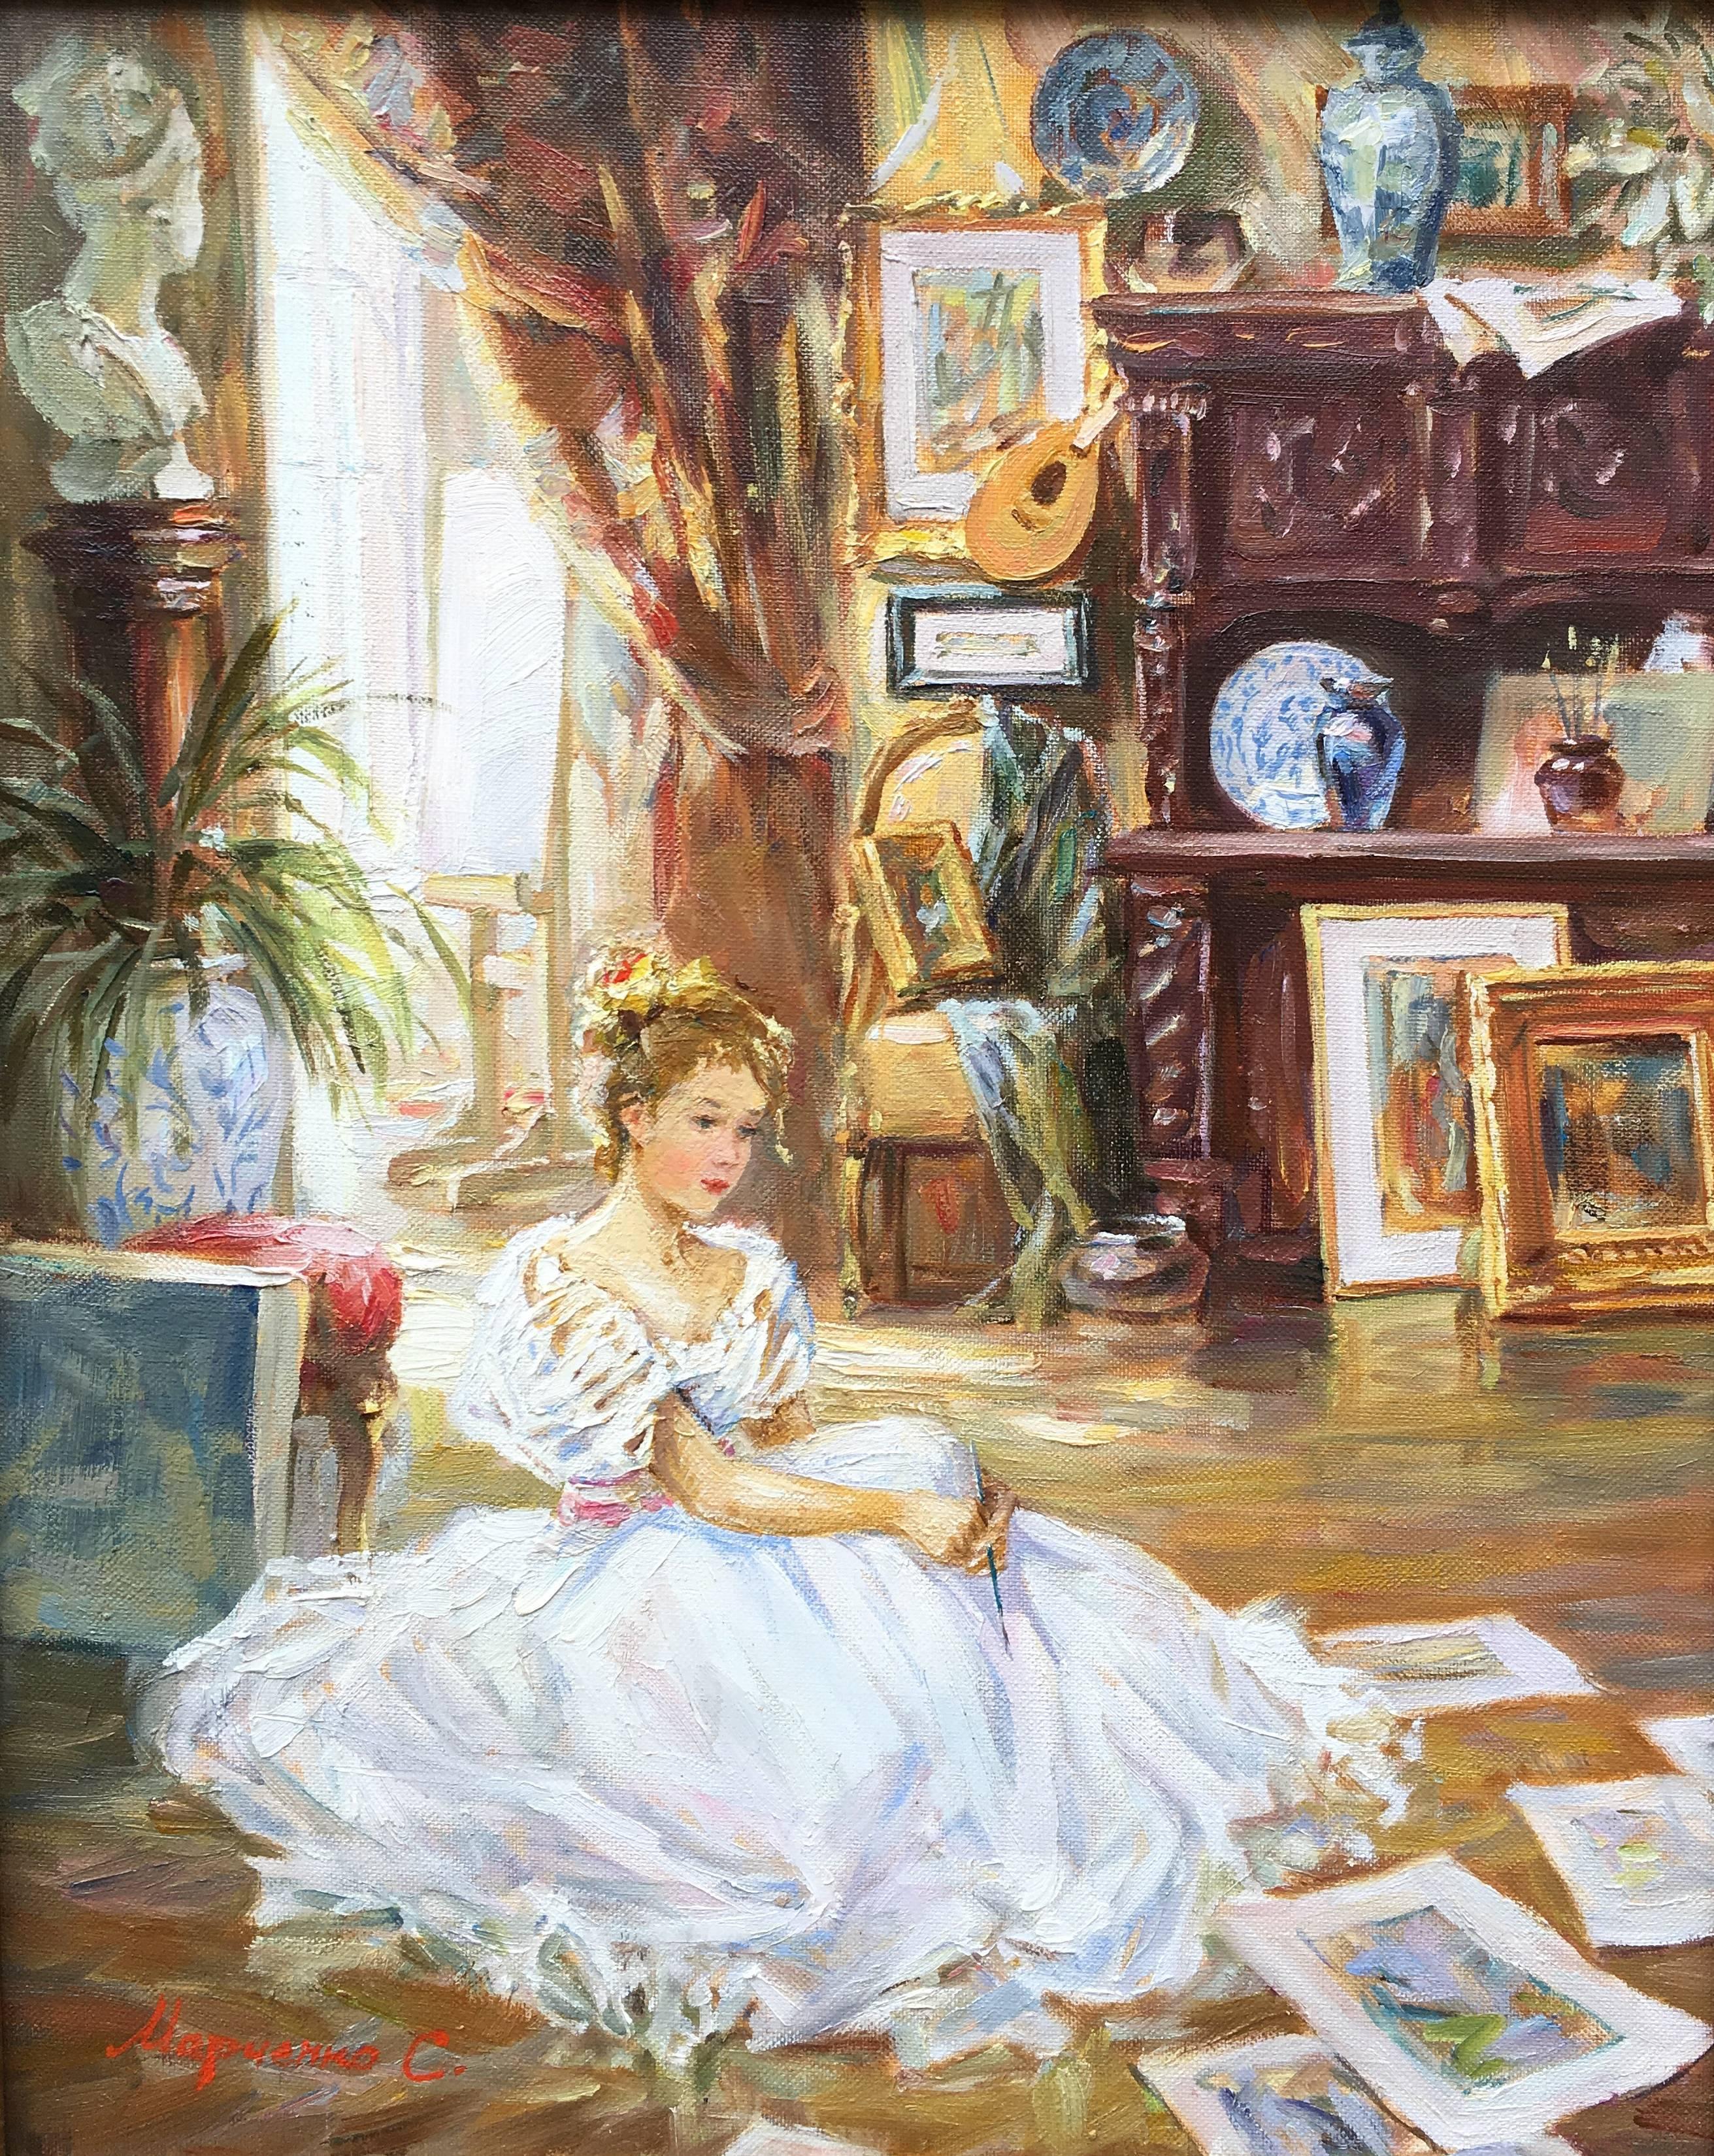 Sergey Marchenko Portrait Painting - The Artist's Studio Canvas Oil Paining Serguey Marchenko Young Girl In Room 